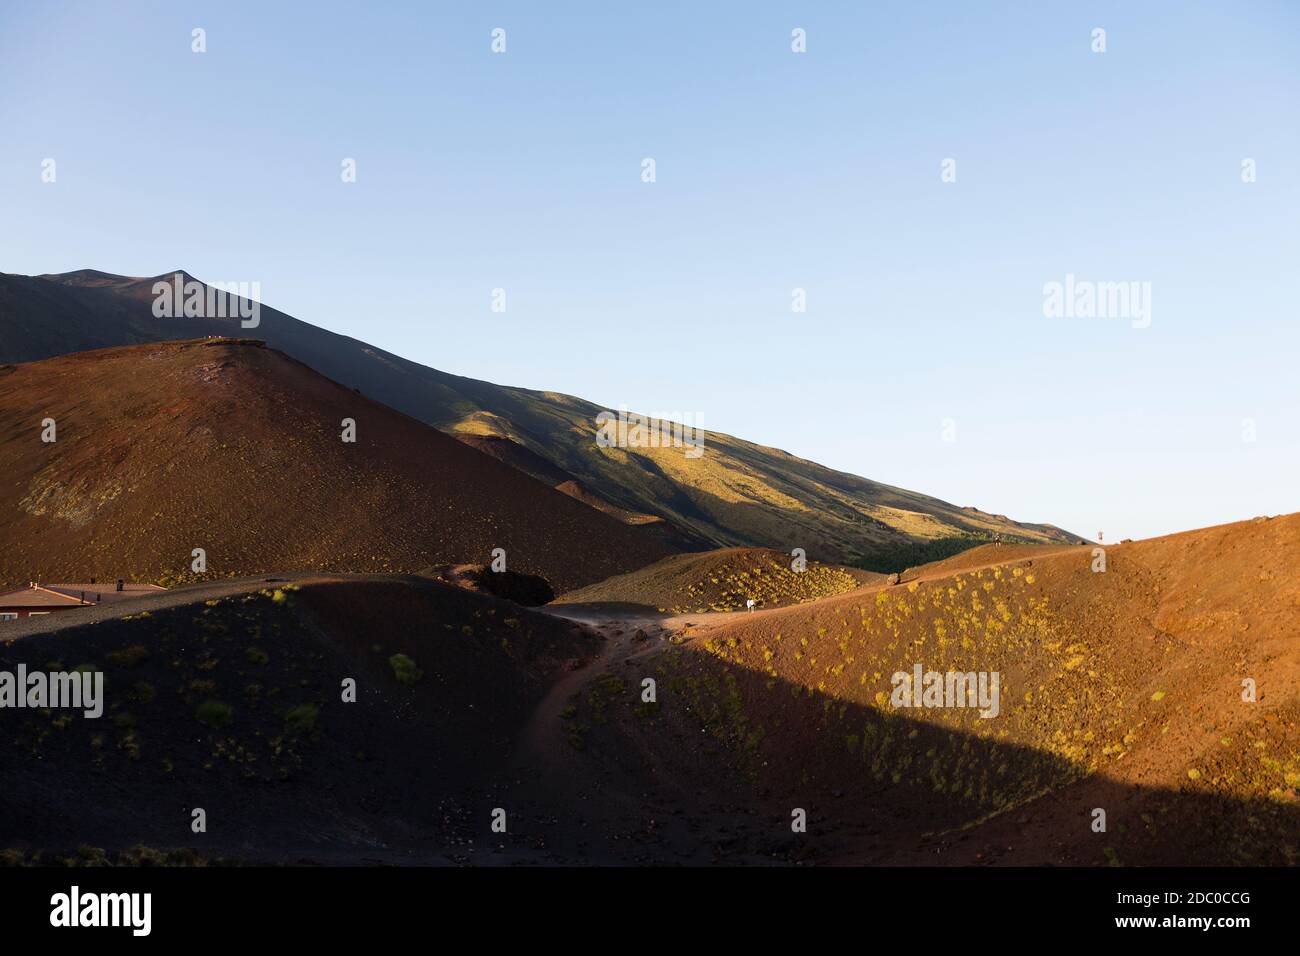 Sicily, Italy. Tourists make the steep climb up the Silvestri Superiori crater near the summit of Mt Etna. Stock Photo